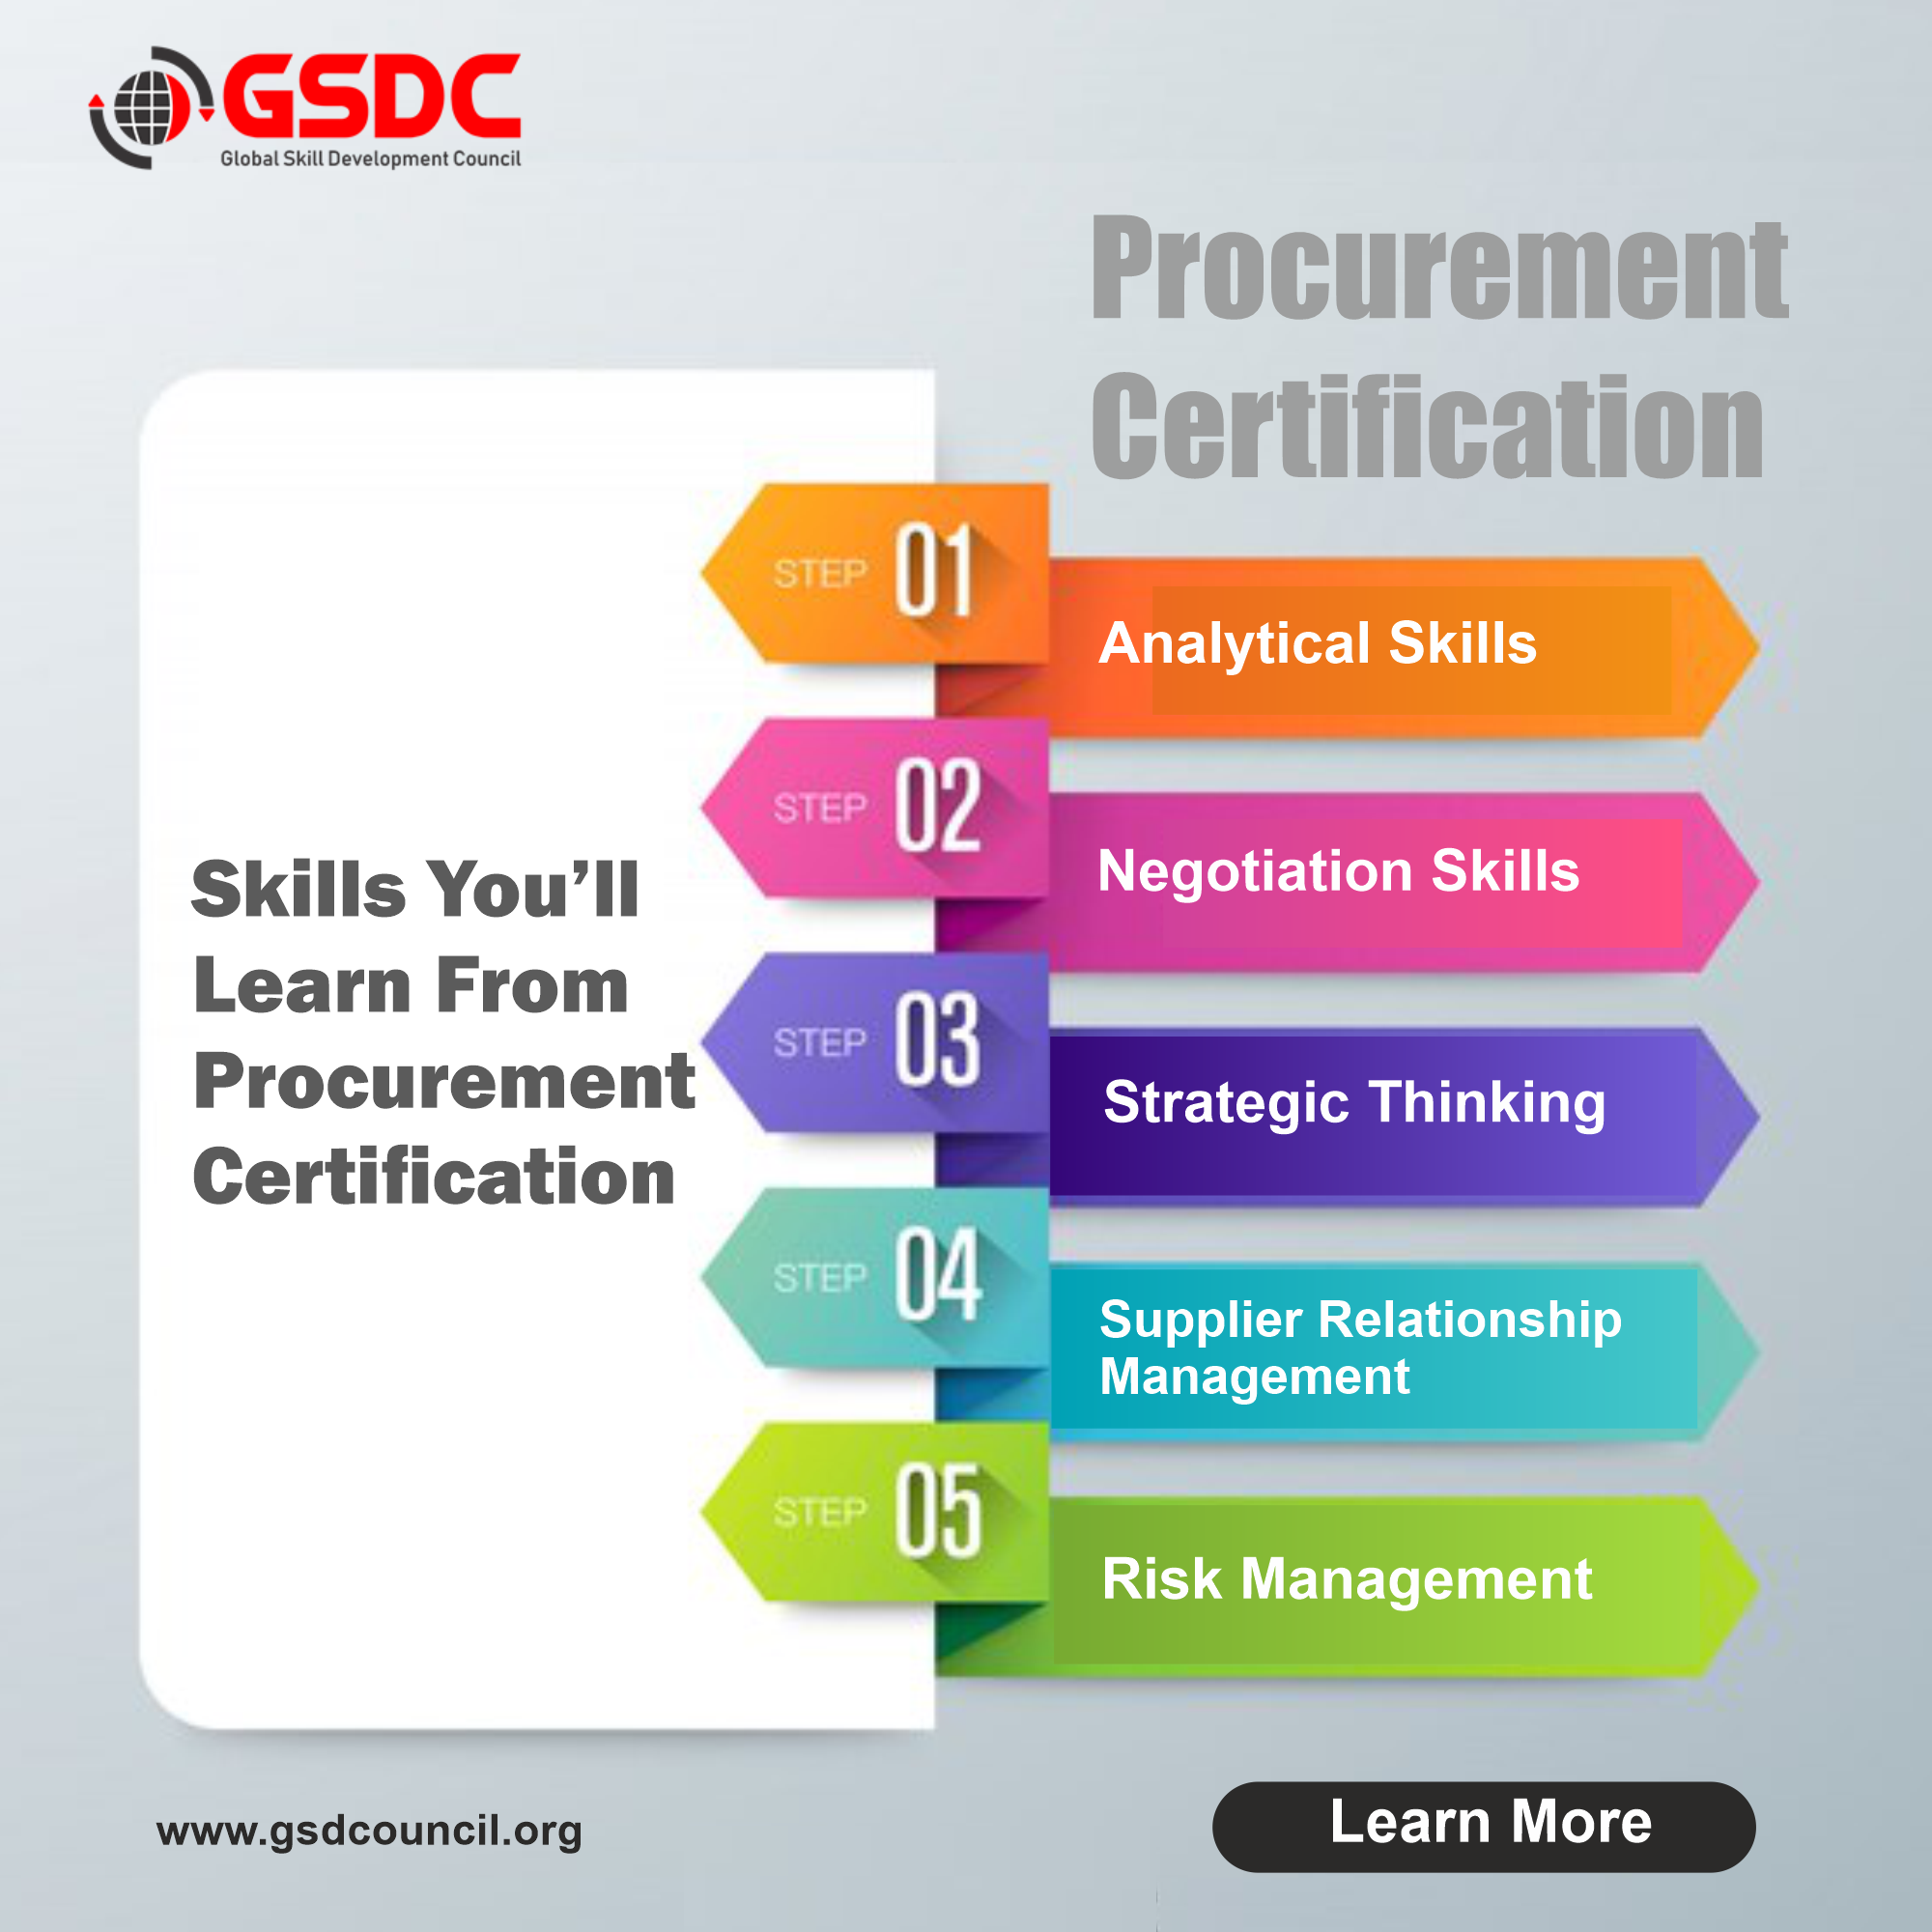 Skills You’ll Learn From Procurement Certification